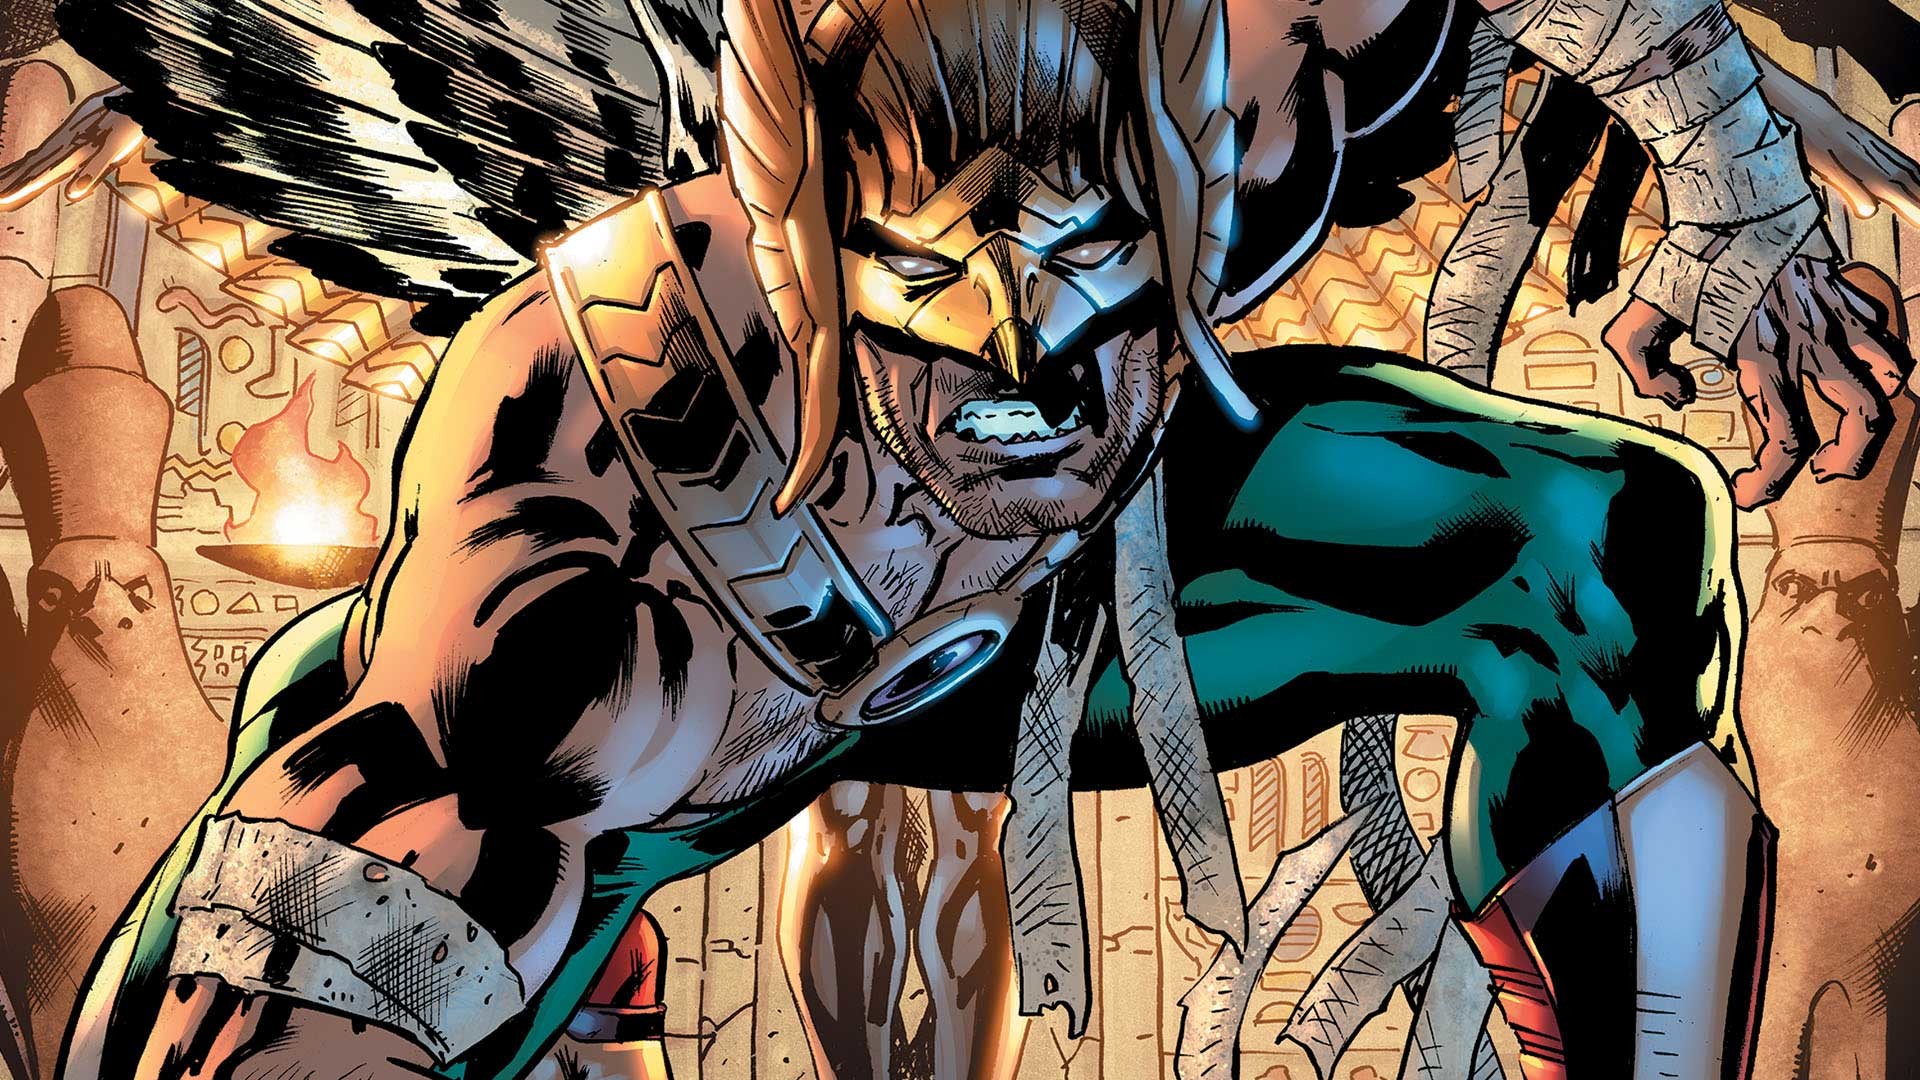 1920x1080 HAWKMAN #2 cover by Bryan Hitch